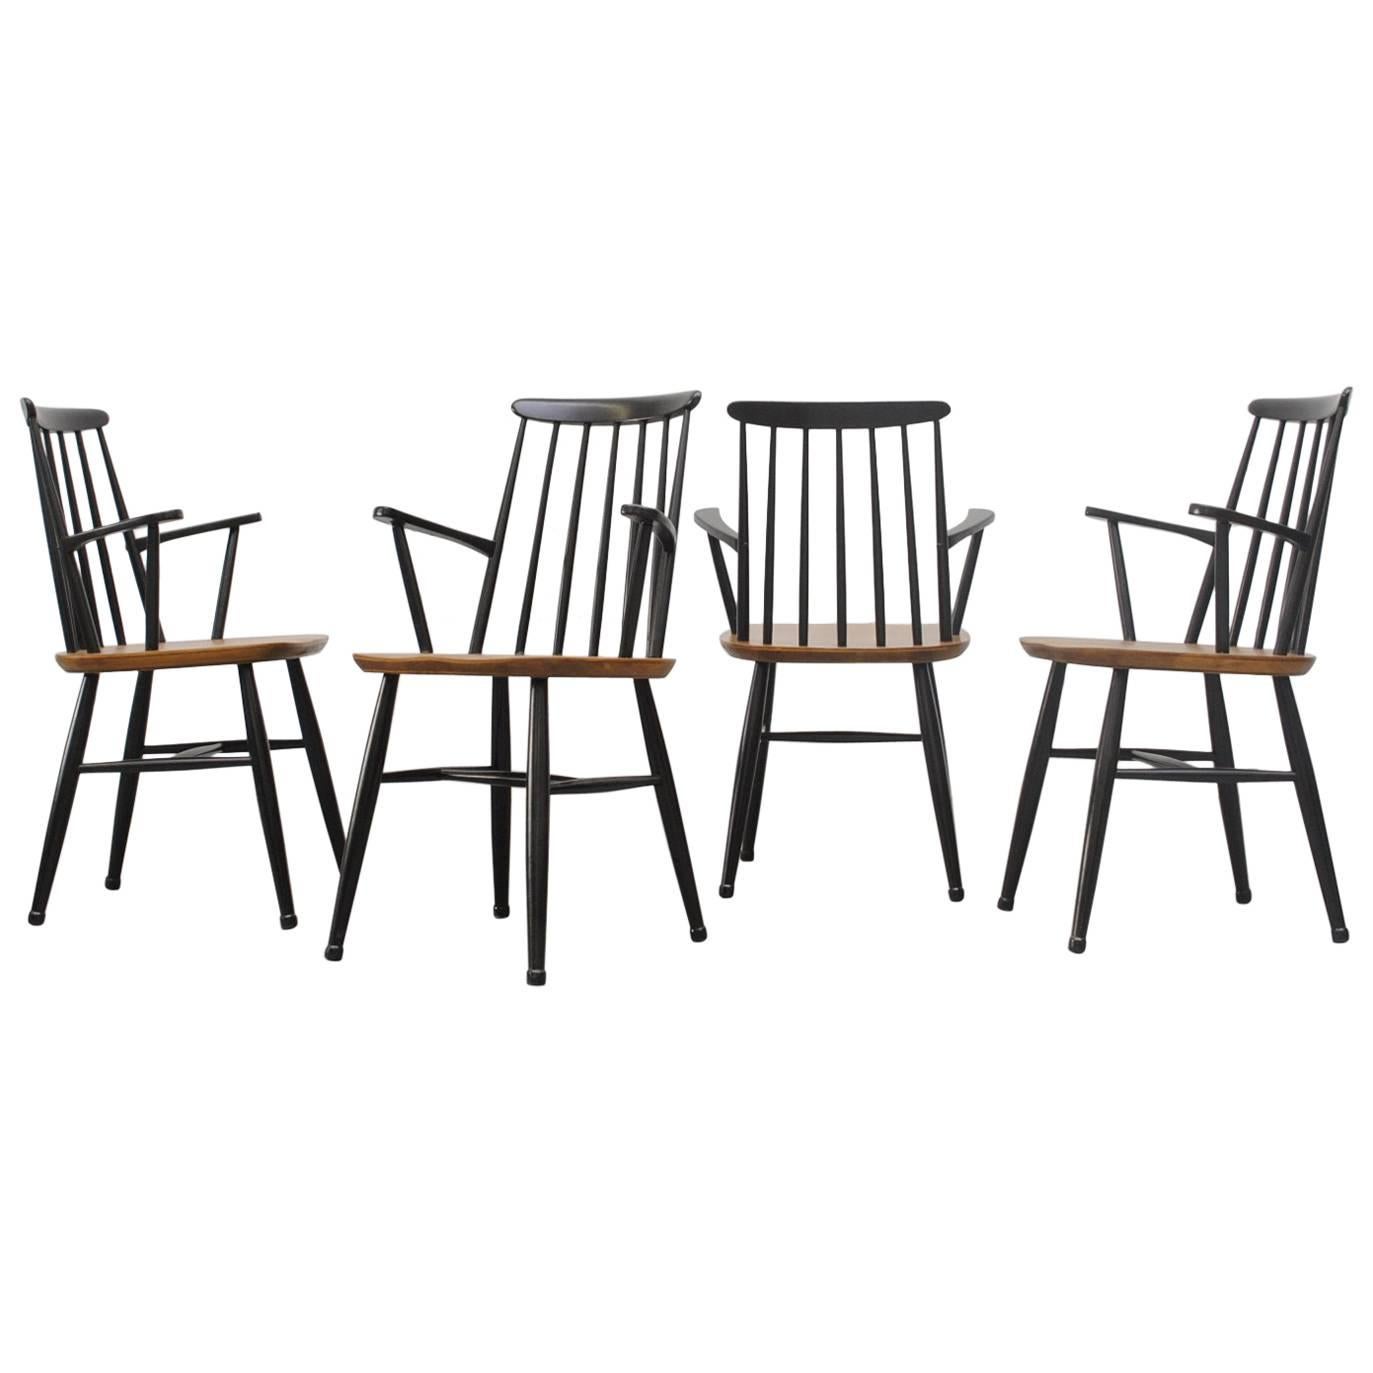 Set of Four Tapiovaara Style Spindle Back Armchairs